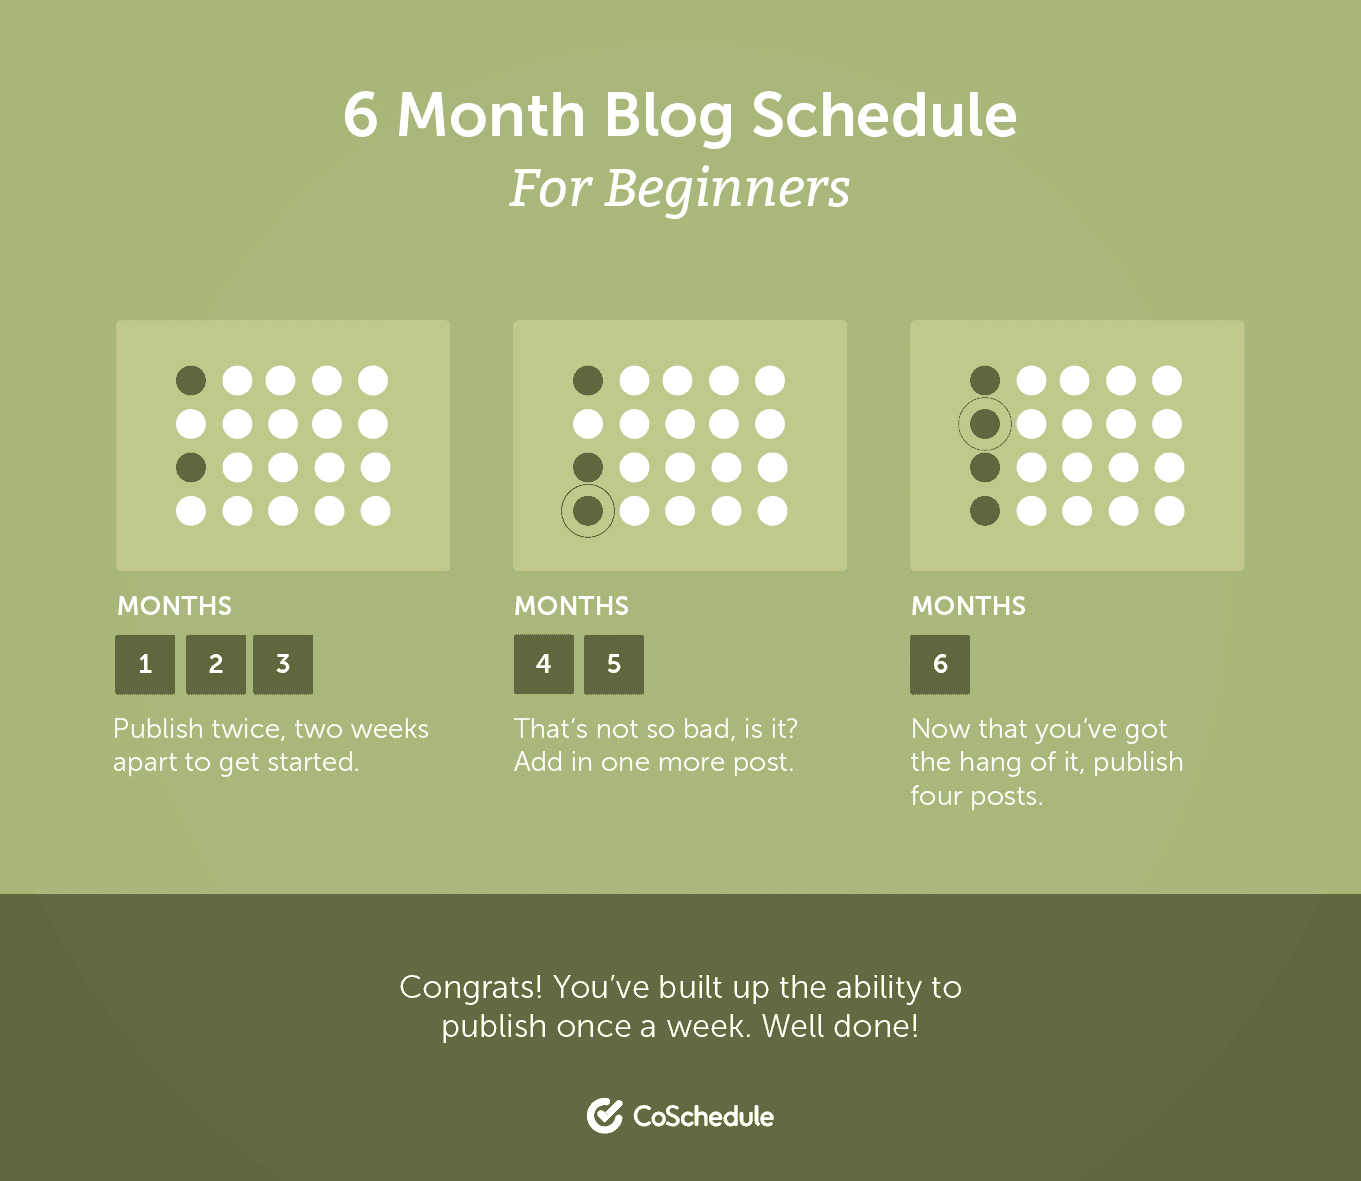 6 month blog schedule for beginners